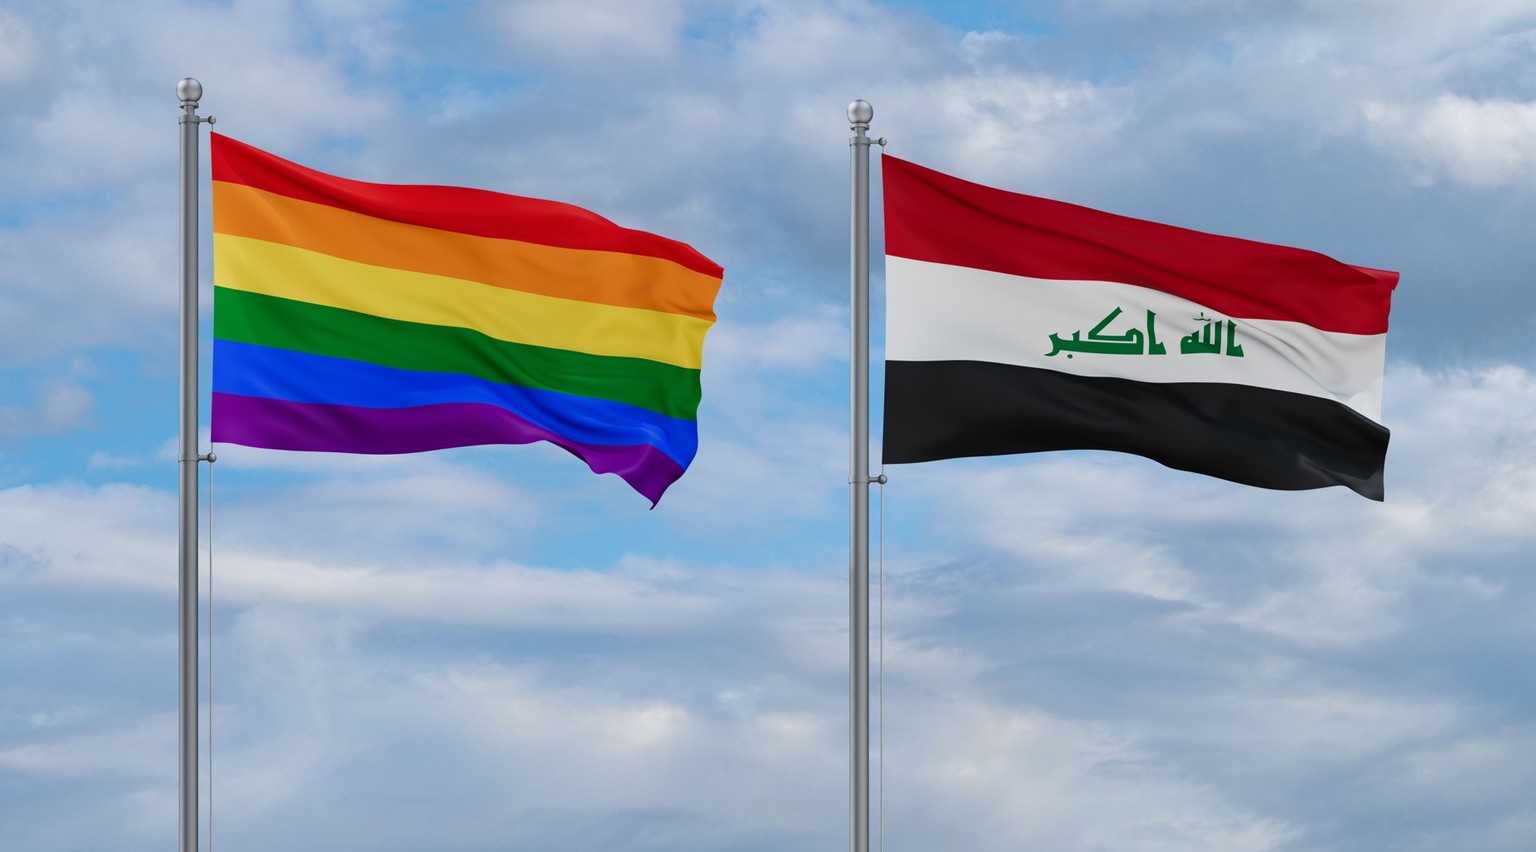 Iraq and LGBT movement flags waving together on blue cloudy sky Model Released Property Released xkwx LGBT gay pride transgender gay pride lesbian bisexual homosexual homosexuality flag sky flapping w ...